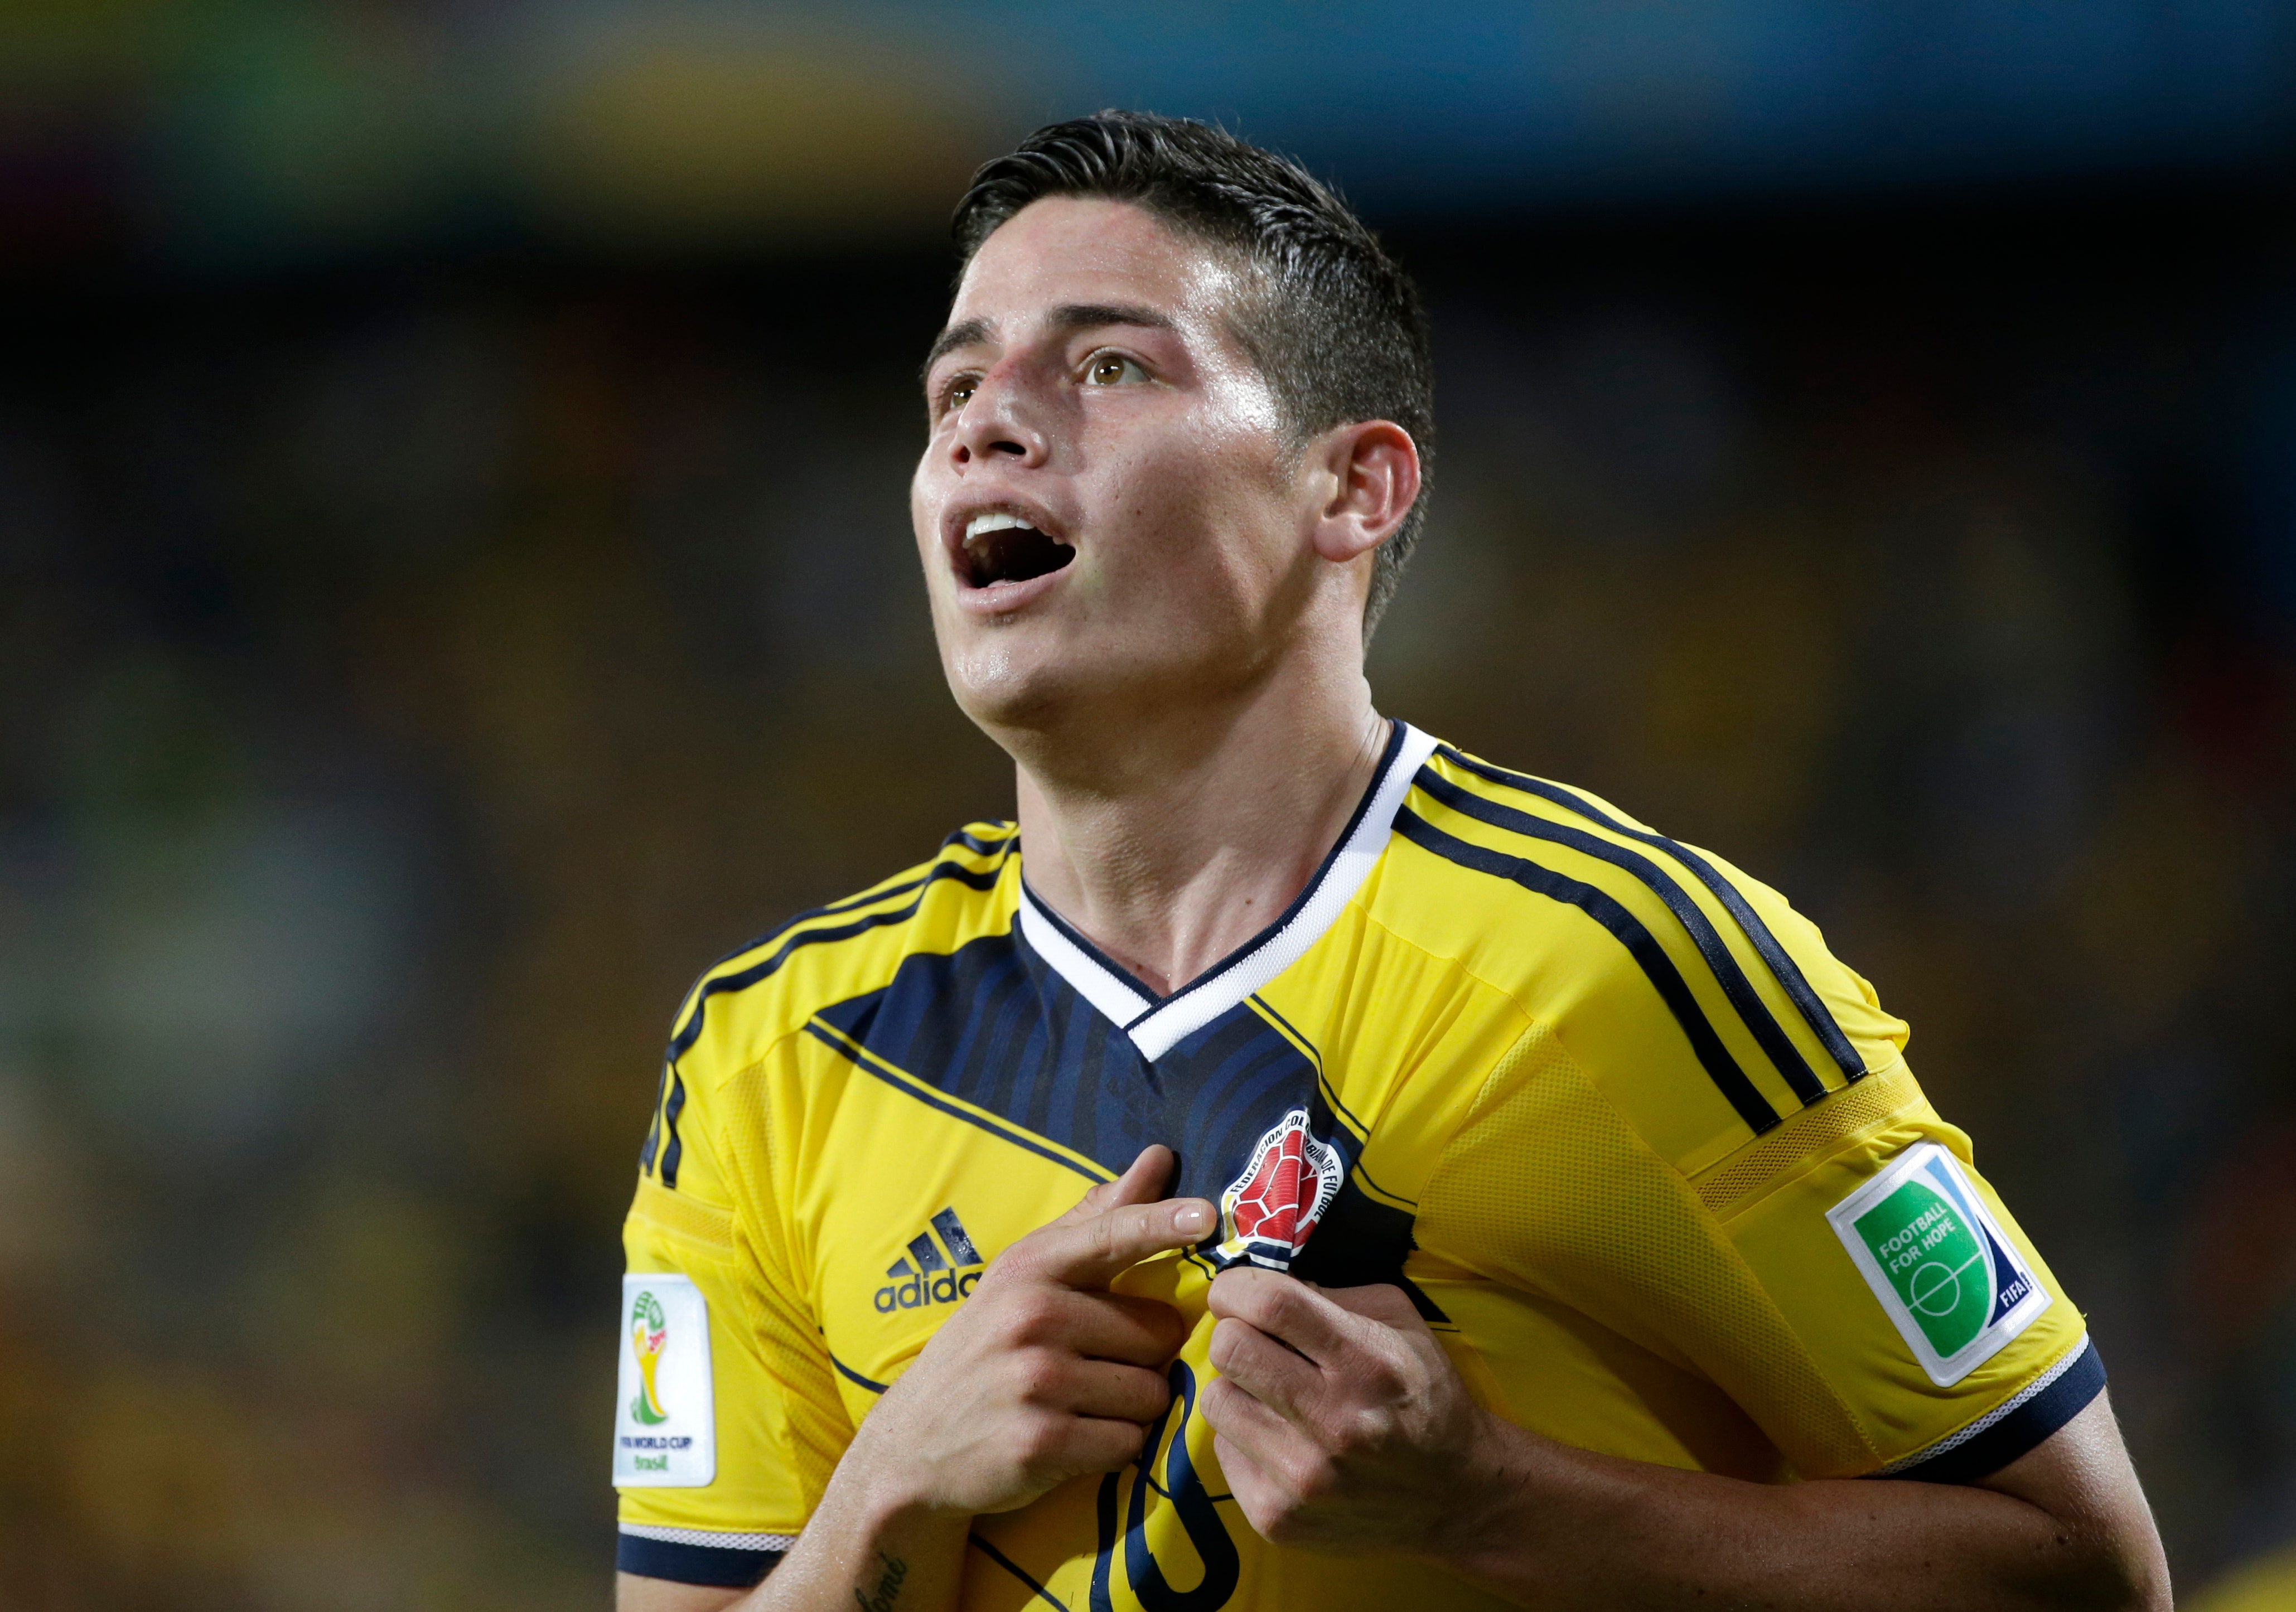 James Rodriguez Leads Colombia To World Cup Quarterfinals